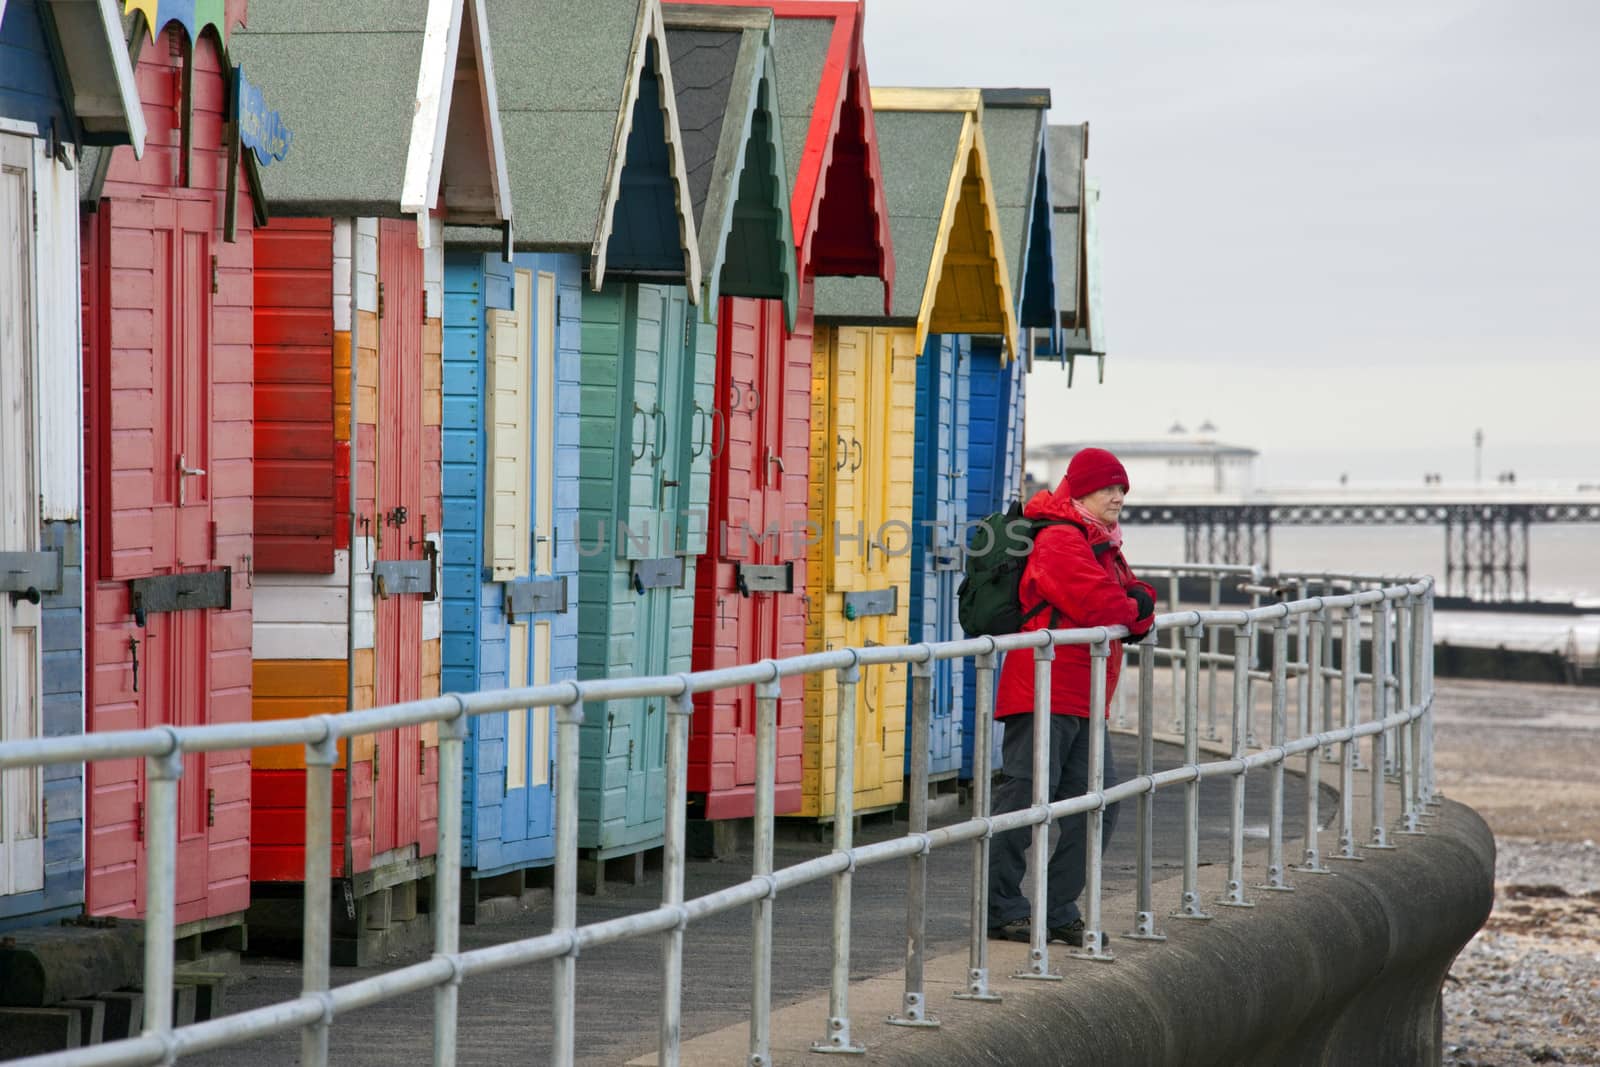 Winter on the seafront at Cromer on the Norfolk coast in southeast England.